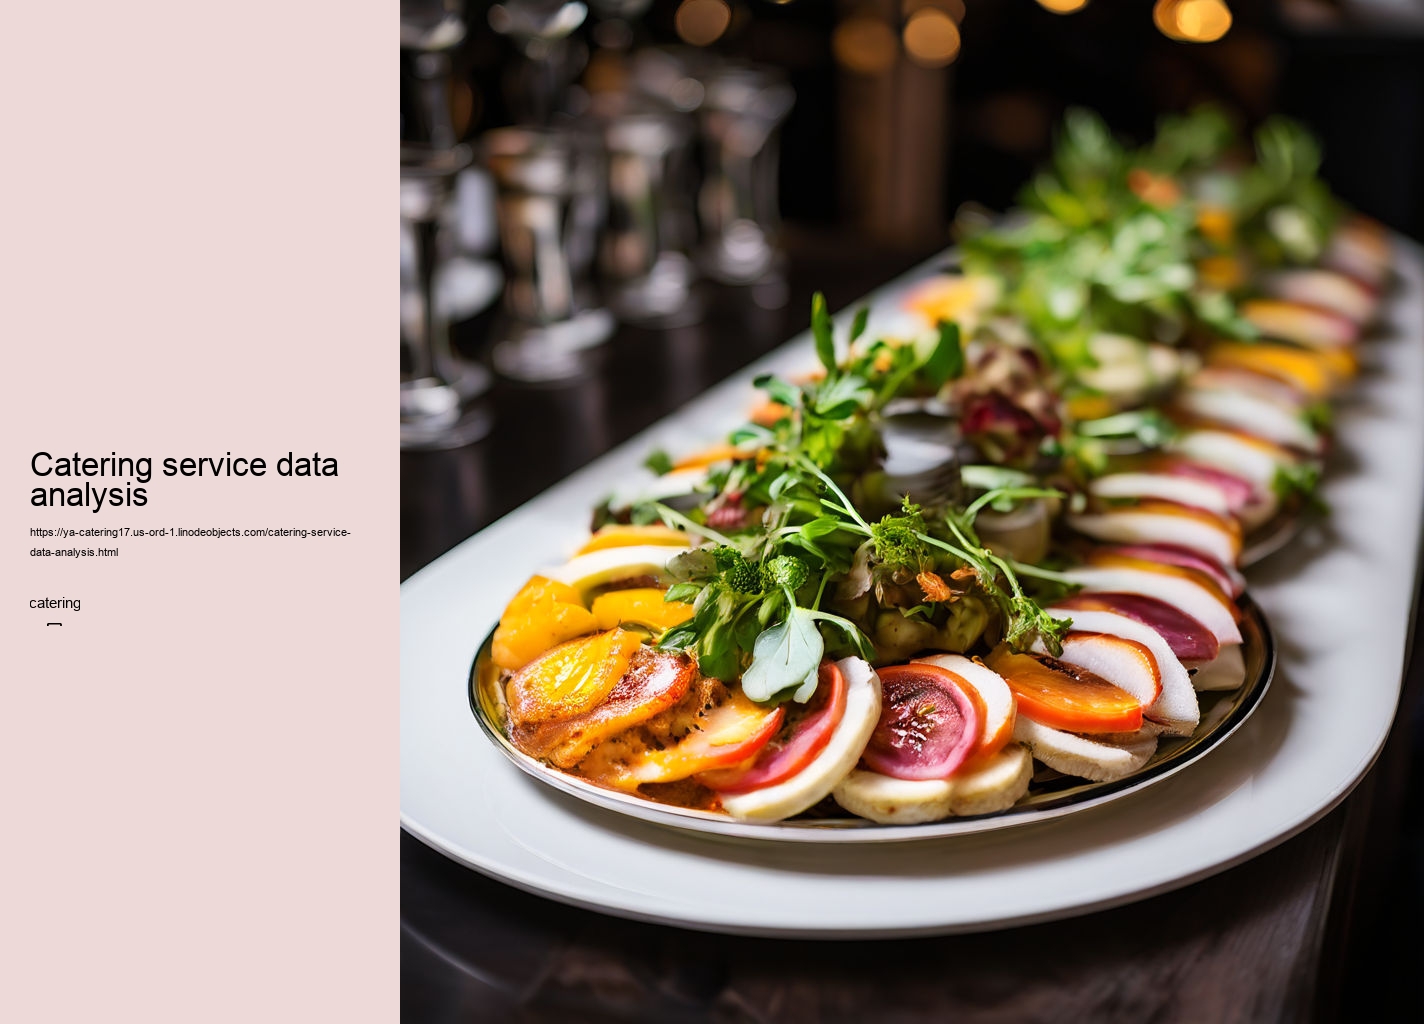 Catering service data analysis